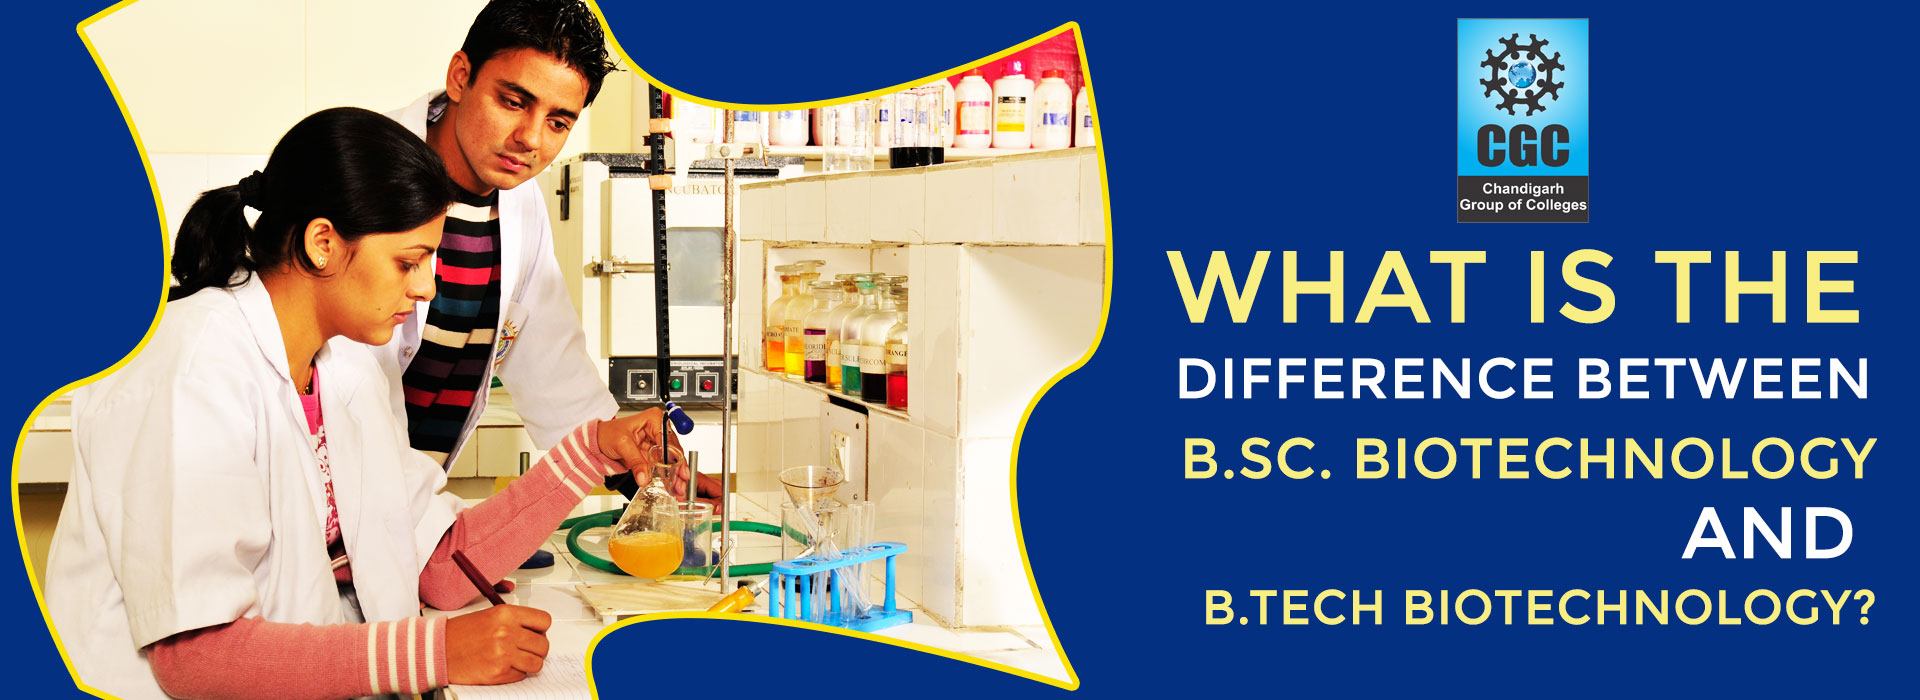 What Is the Difference Between B.Sc. Biotechnology And B.Tech Biotechnology? 